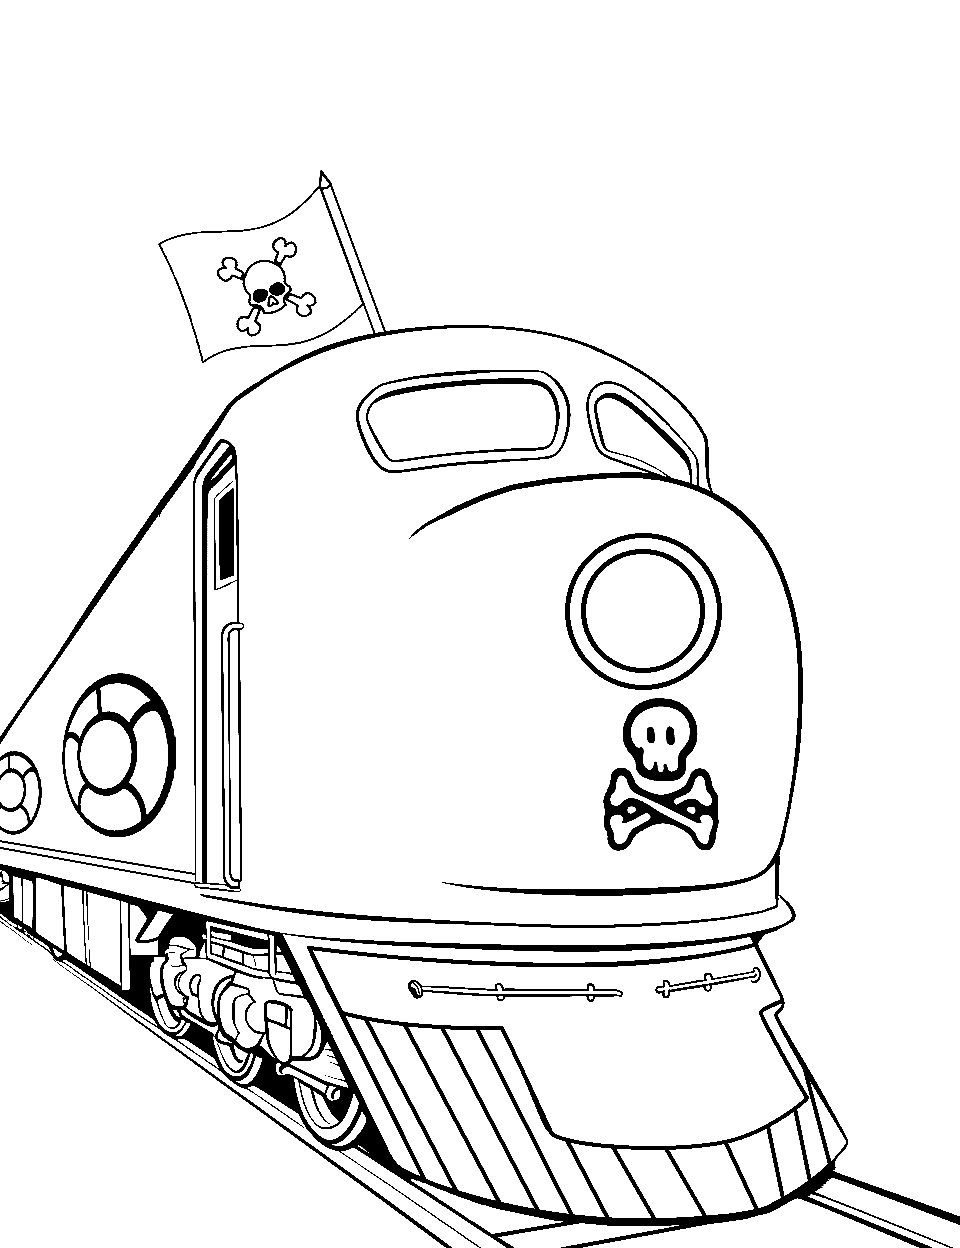 Pirate Train Adventure Coloring Page - A modern train with a pirate ship theme on the tracks with Jolly Roger.